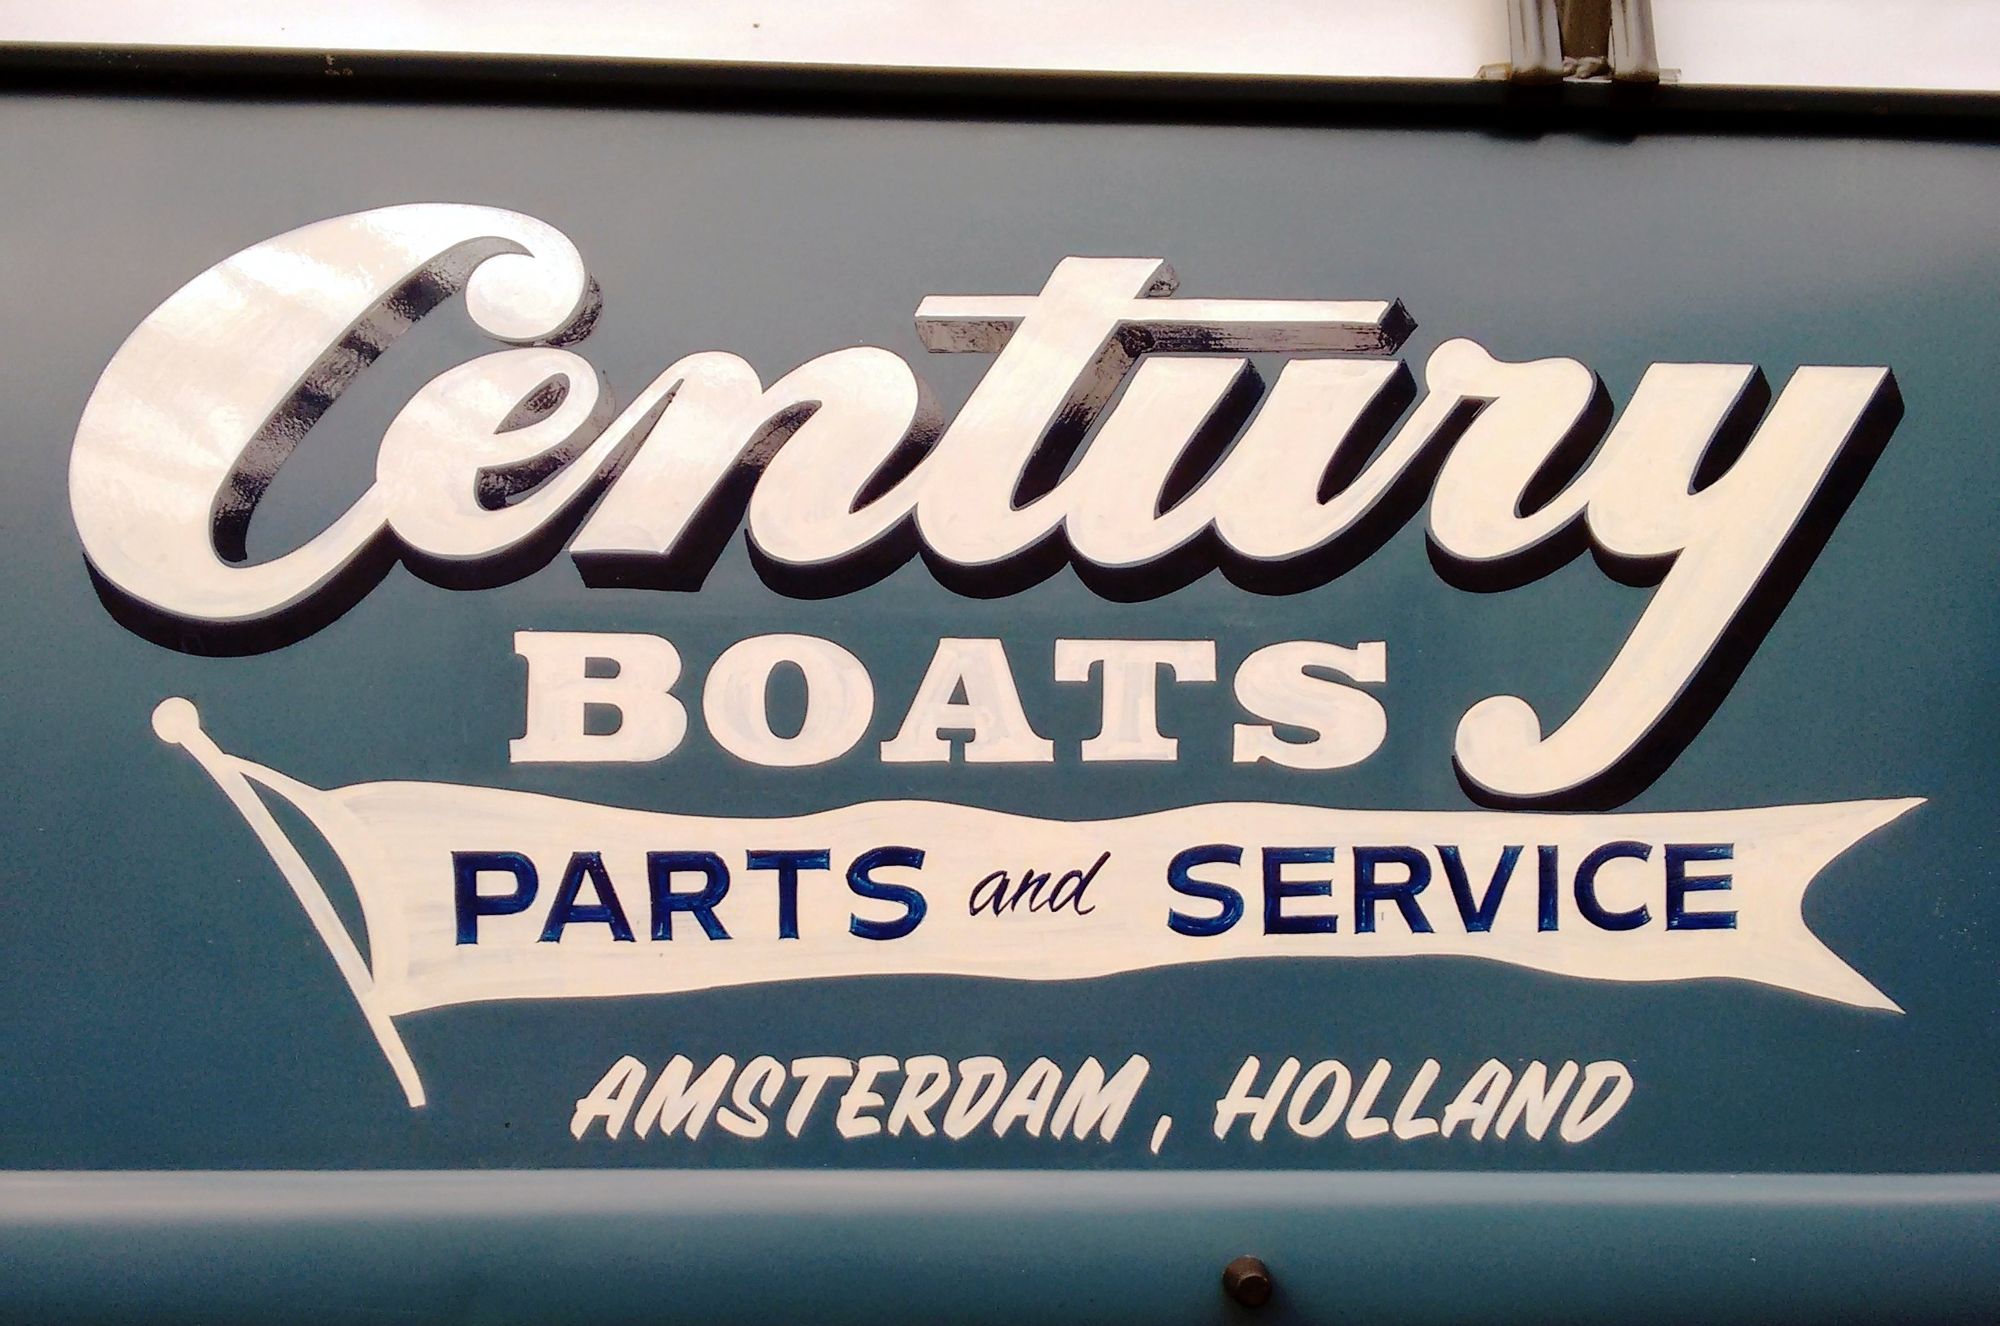 Letterheads 2016: Greetings from Amsterdam